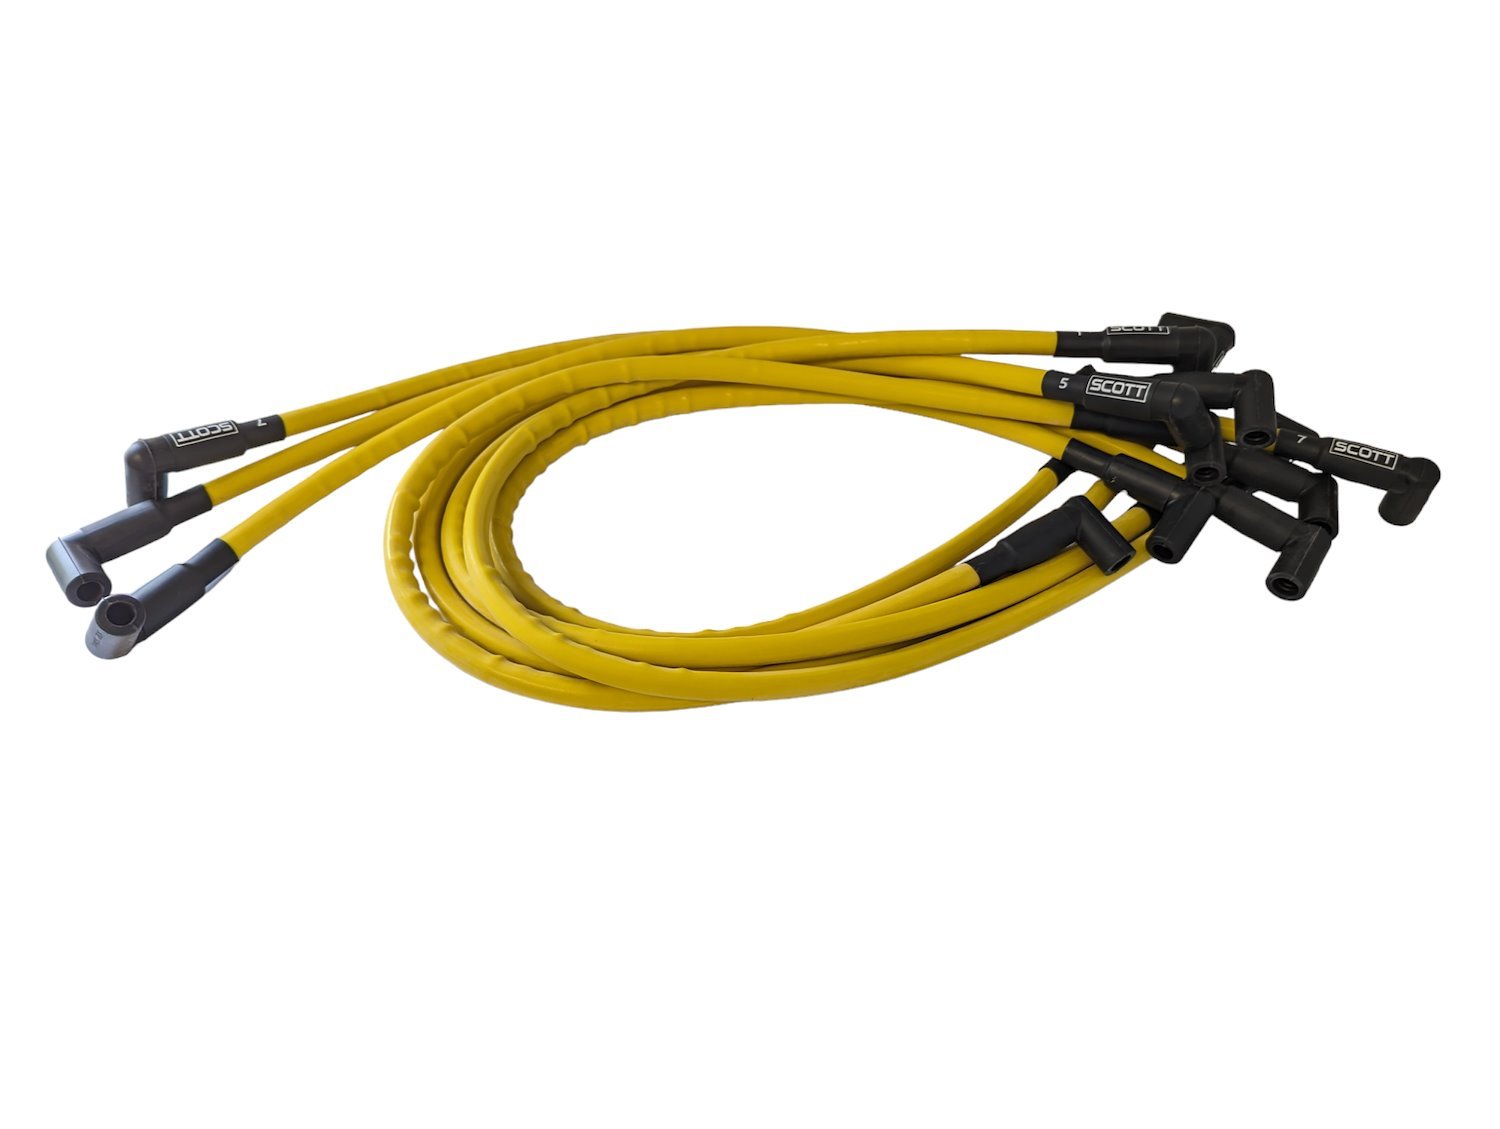 SPW-CH-407-7 High-Performance Silicone-Sleeved Spark Plug Wire Set for Small Block Chevy, Under Header [Yellow]